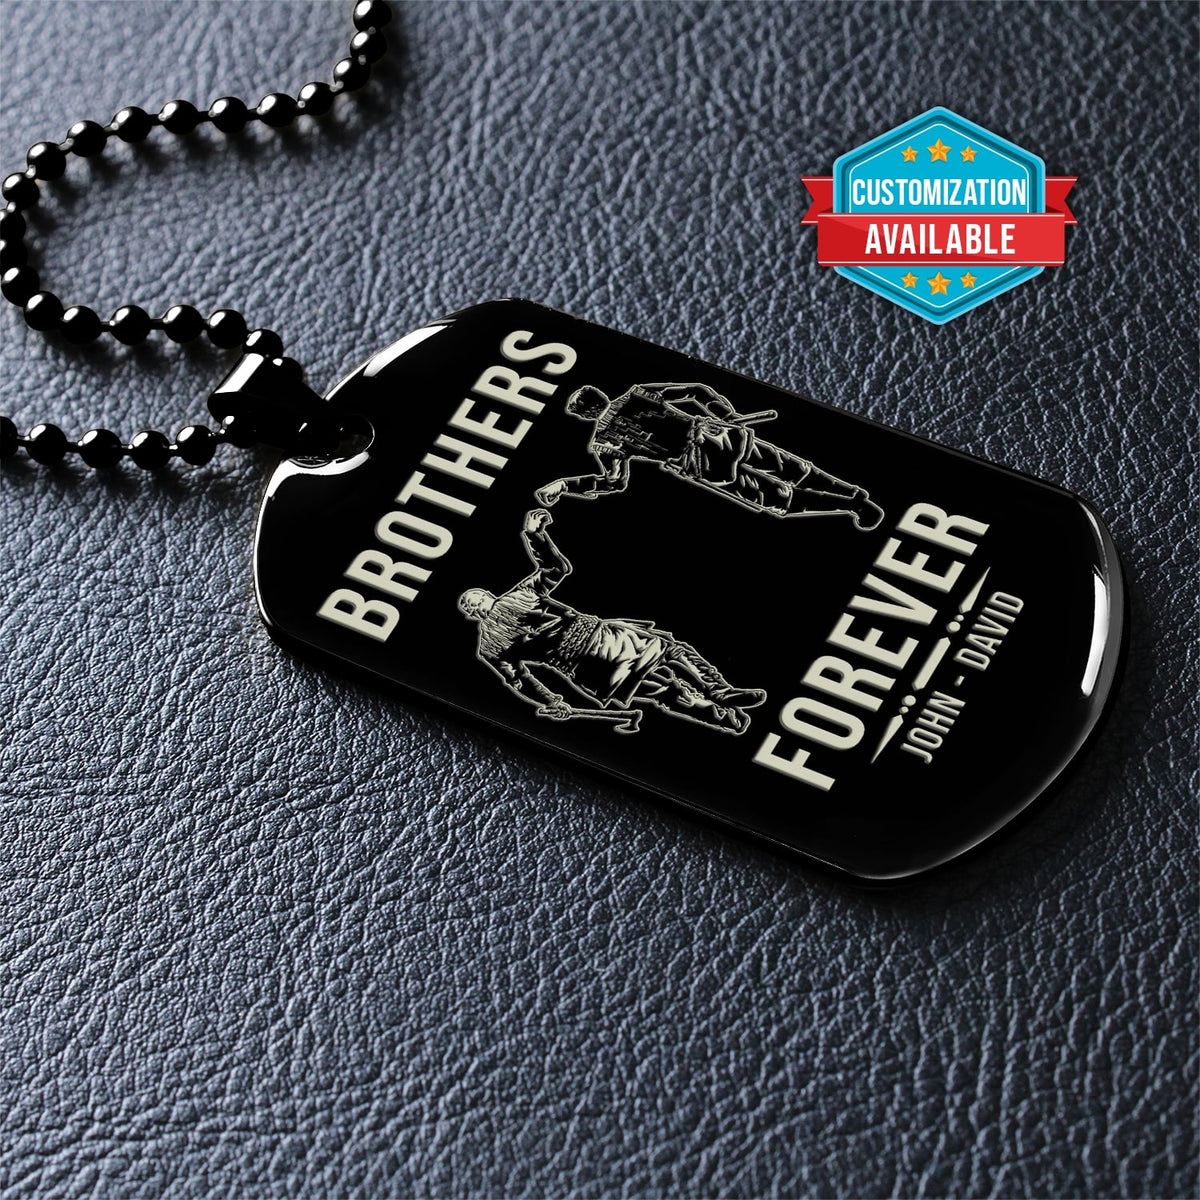 VKD027 - Brothers Forever - It's About Being Better Than You Were The Day Before - Ragnar Lothbrok - Floki - Vikings - Double Sided Engrave Black Dog Tag